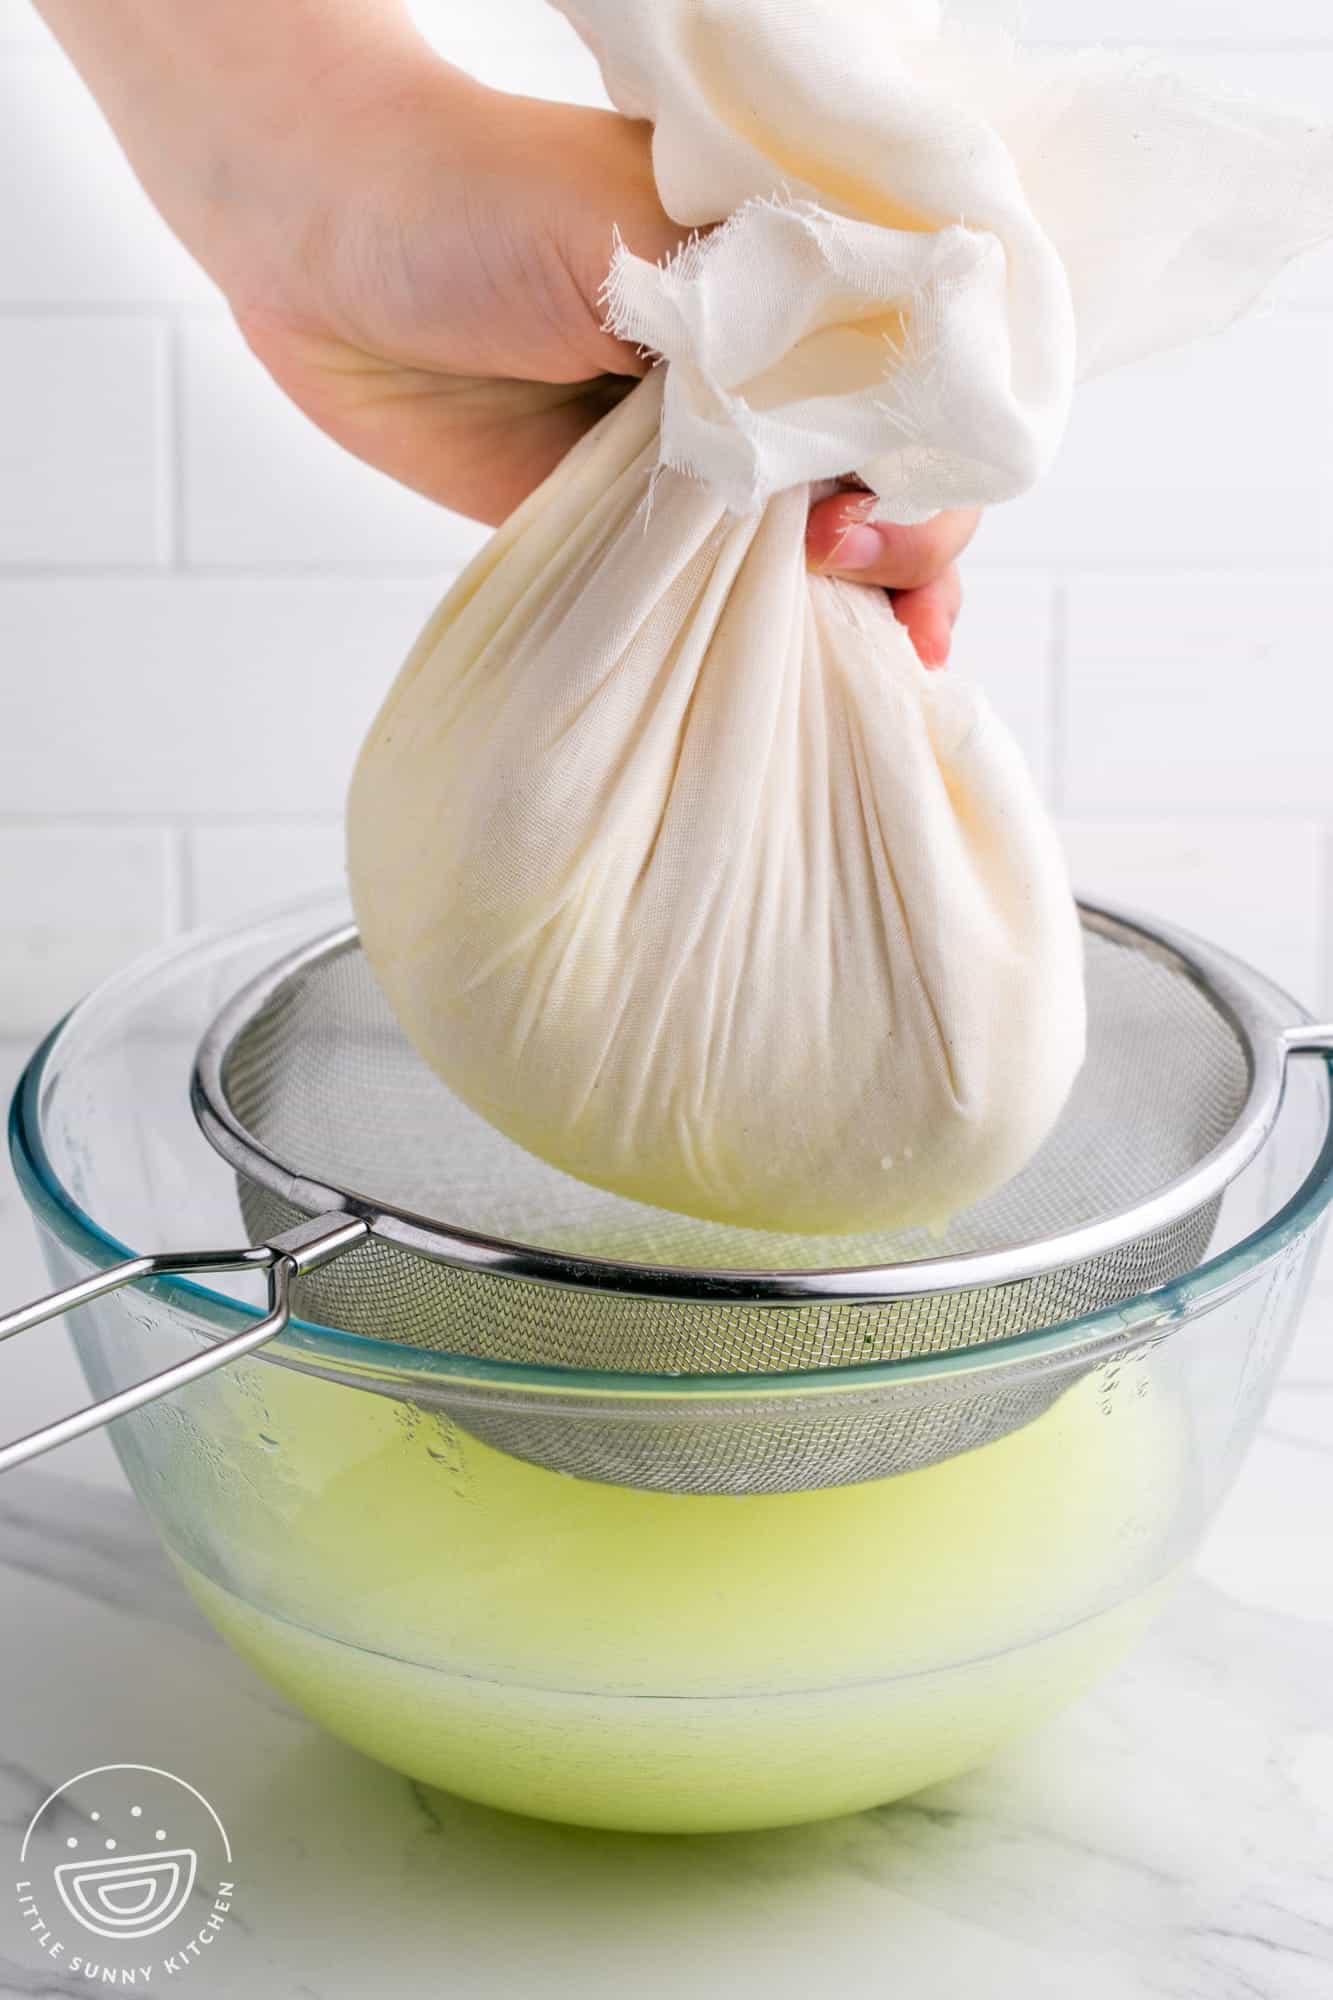 a hand is holding cheese in a cheesecloth over a metal sieve that is over a clear glass bowl. The bowl i filled with whey.